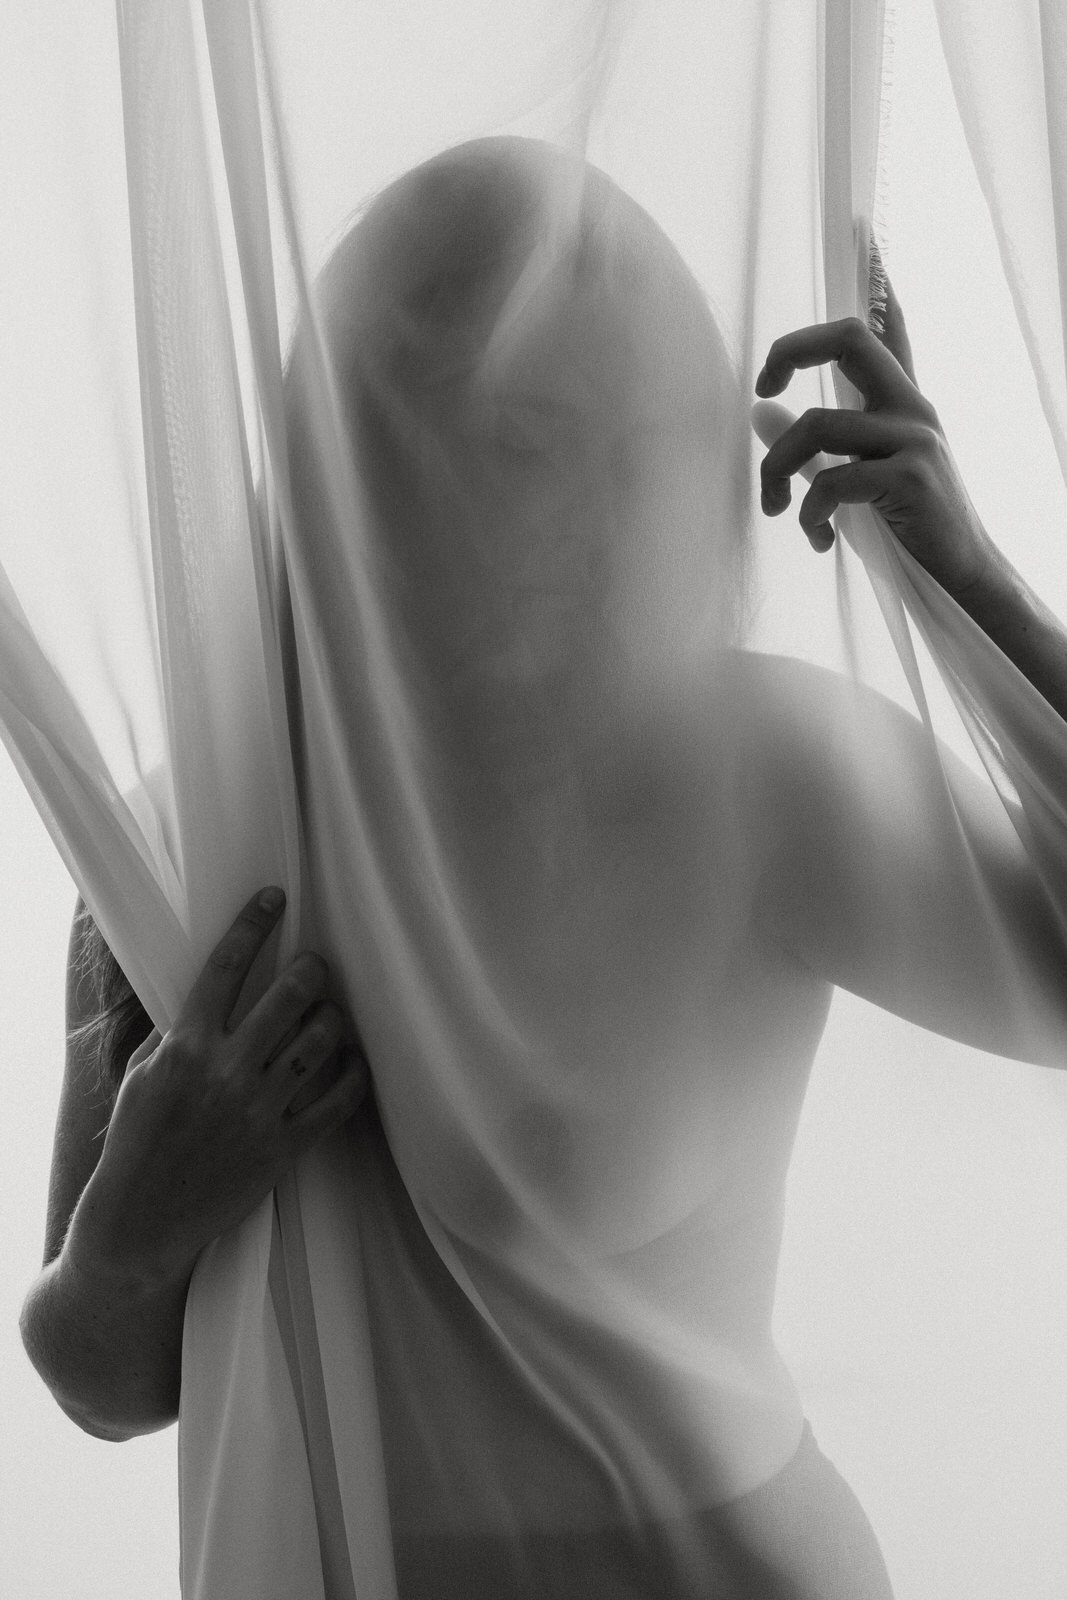 fine art nude photo of a woman behind a sheer curtain and holding edges of curtain